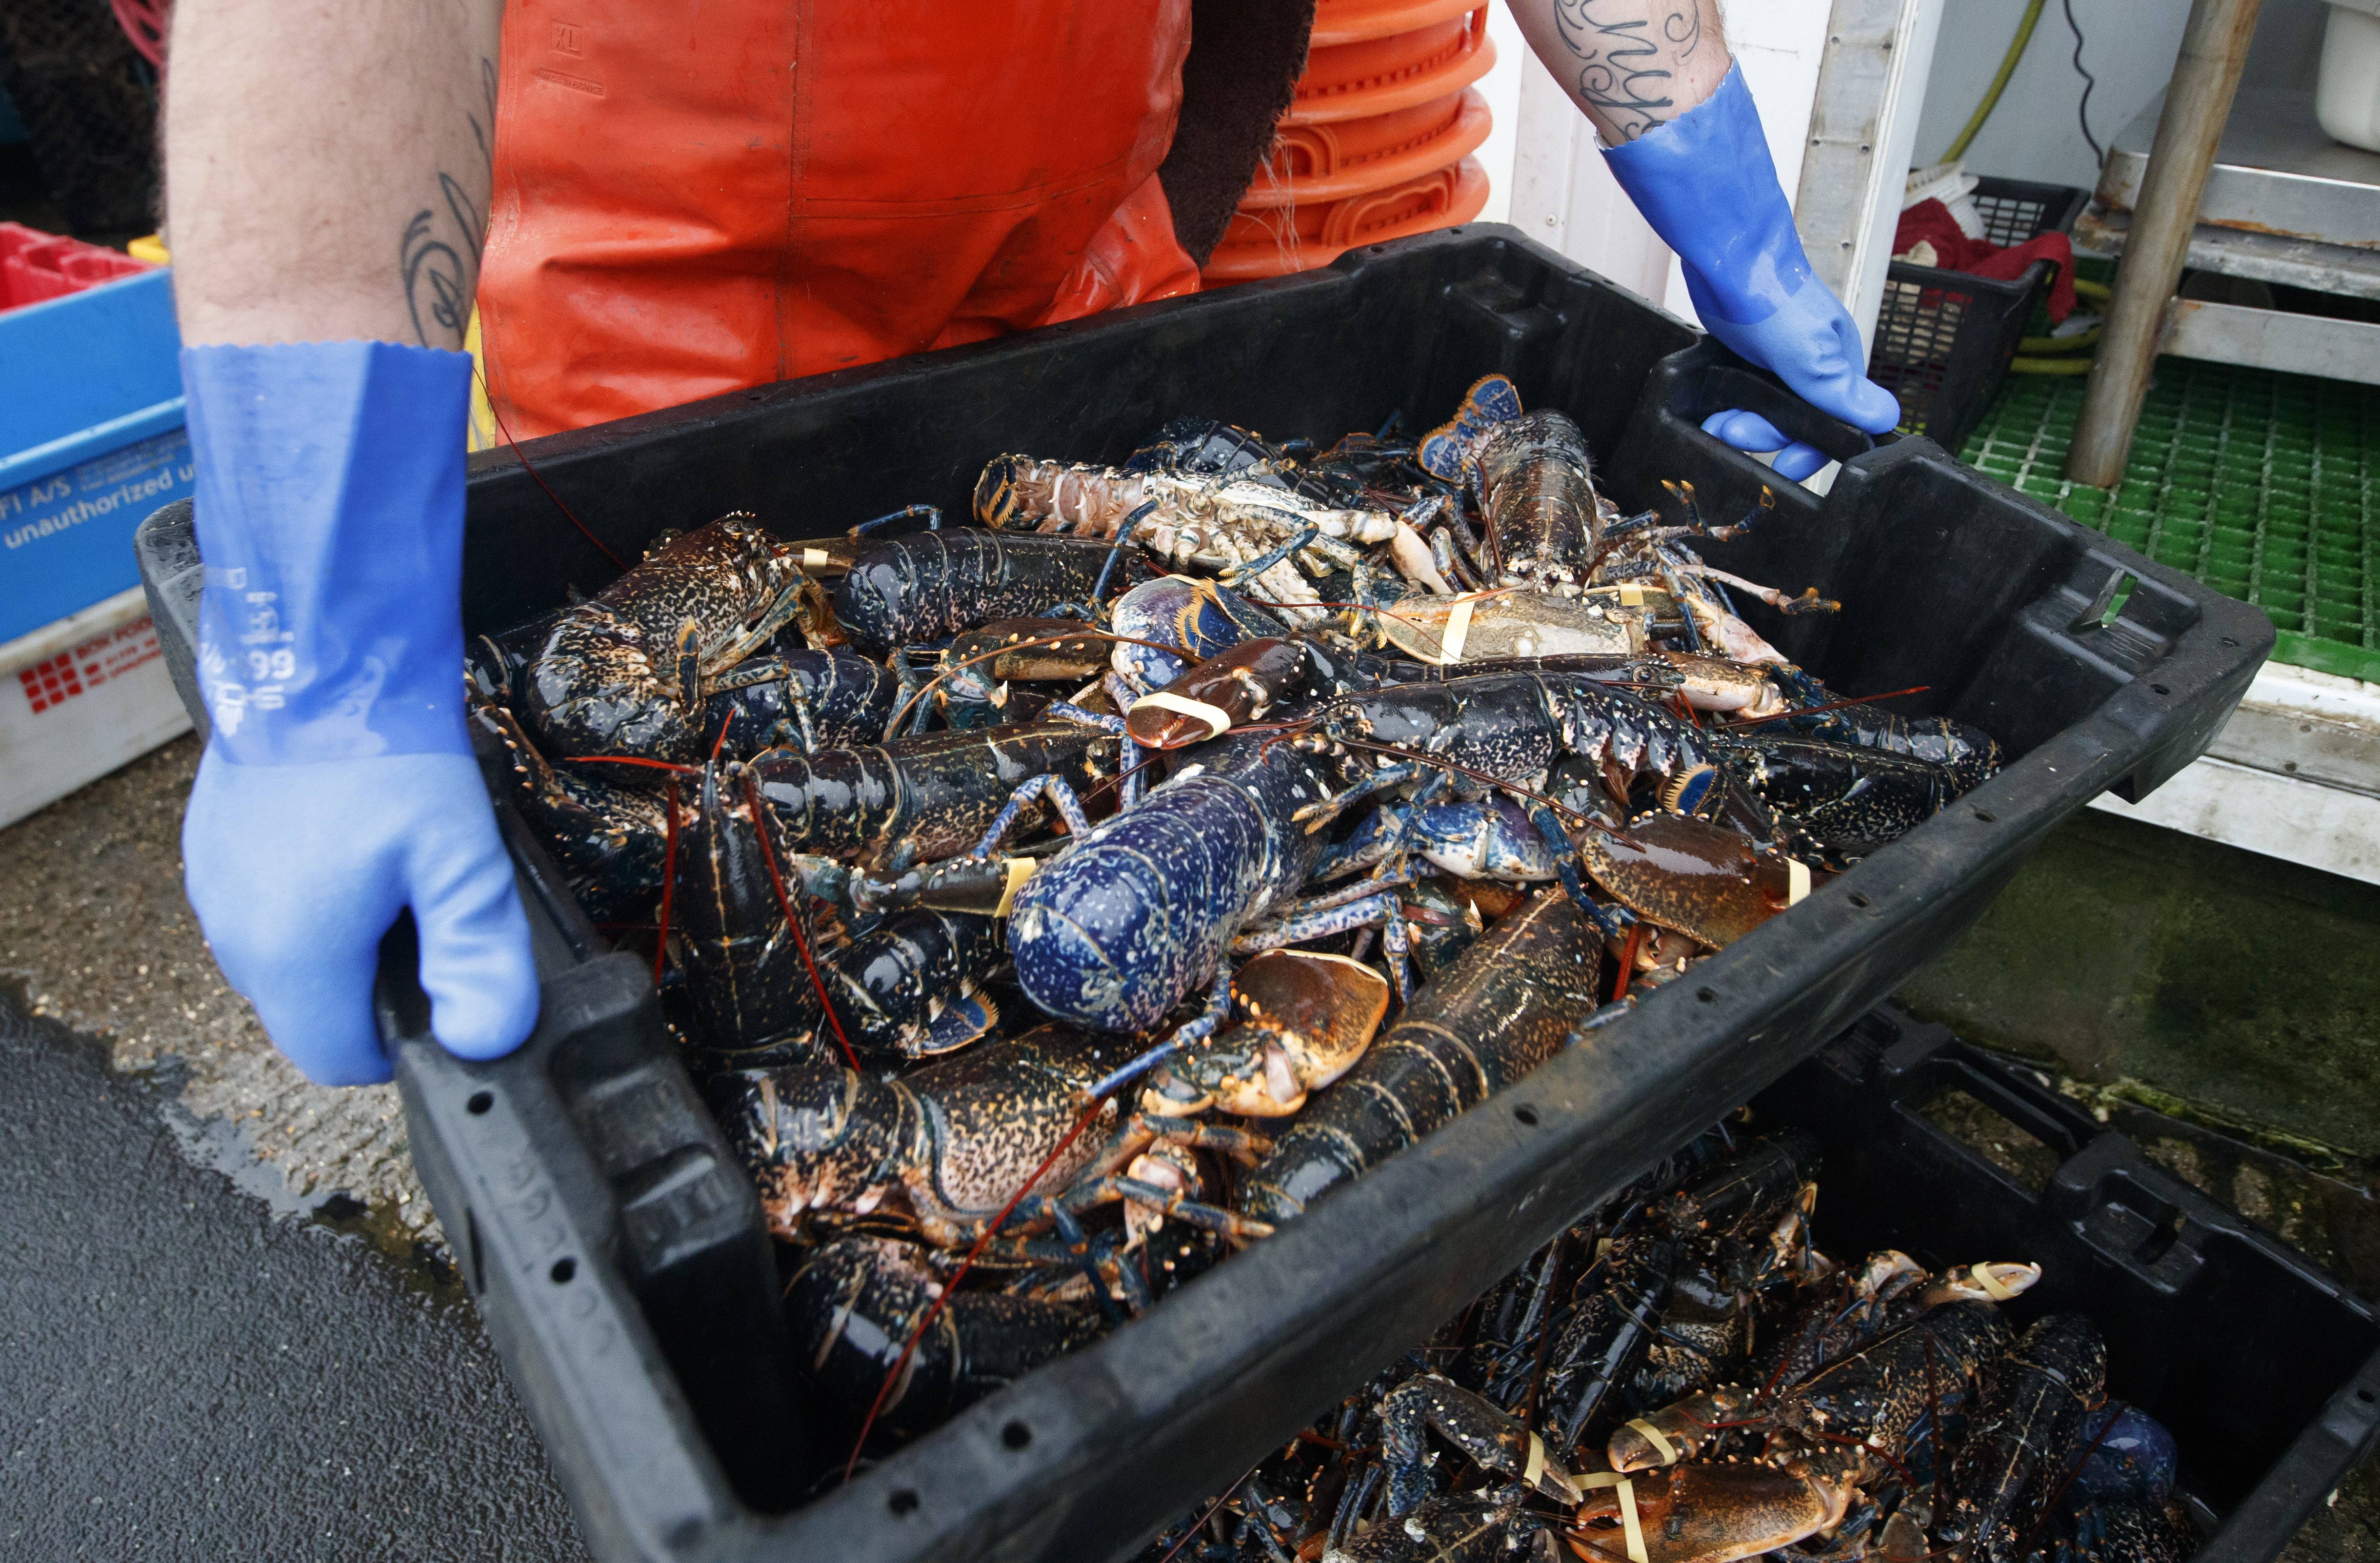 Lobsters are processed at the fishing port at Bridlington Harbour in Yorkshire, in December 2020